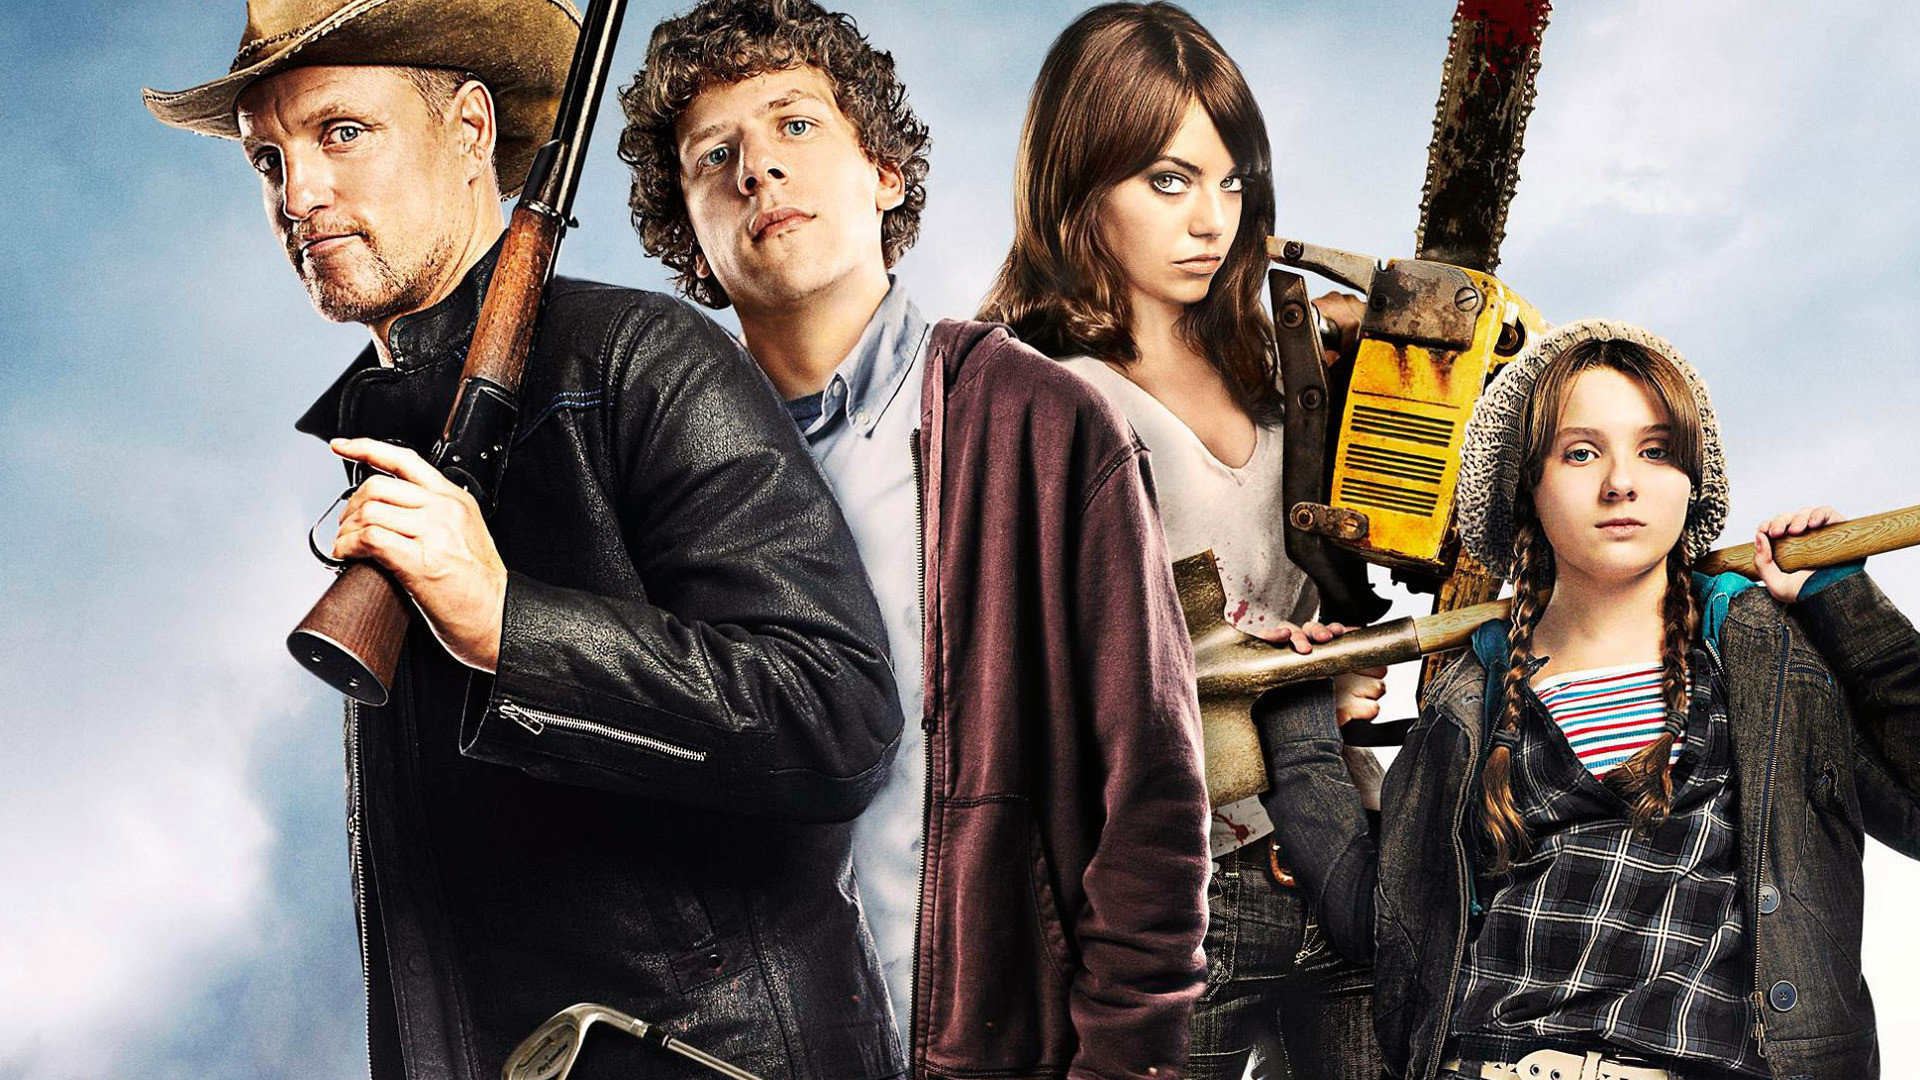 Download full hd 1080p Zombieland PC background ID:27786 for free